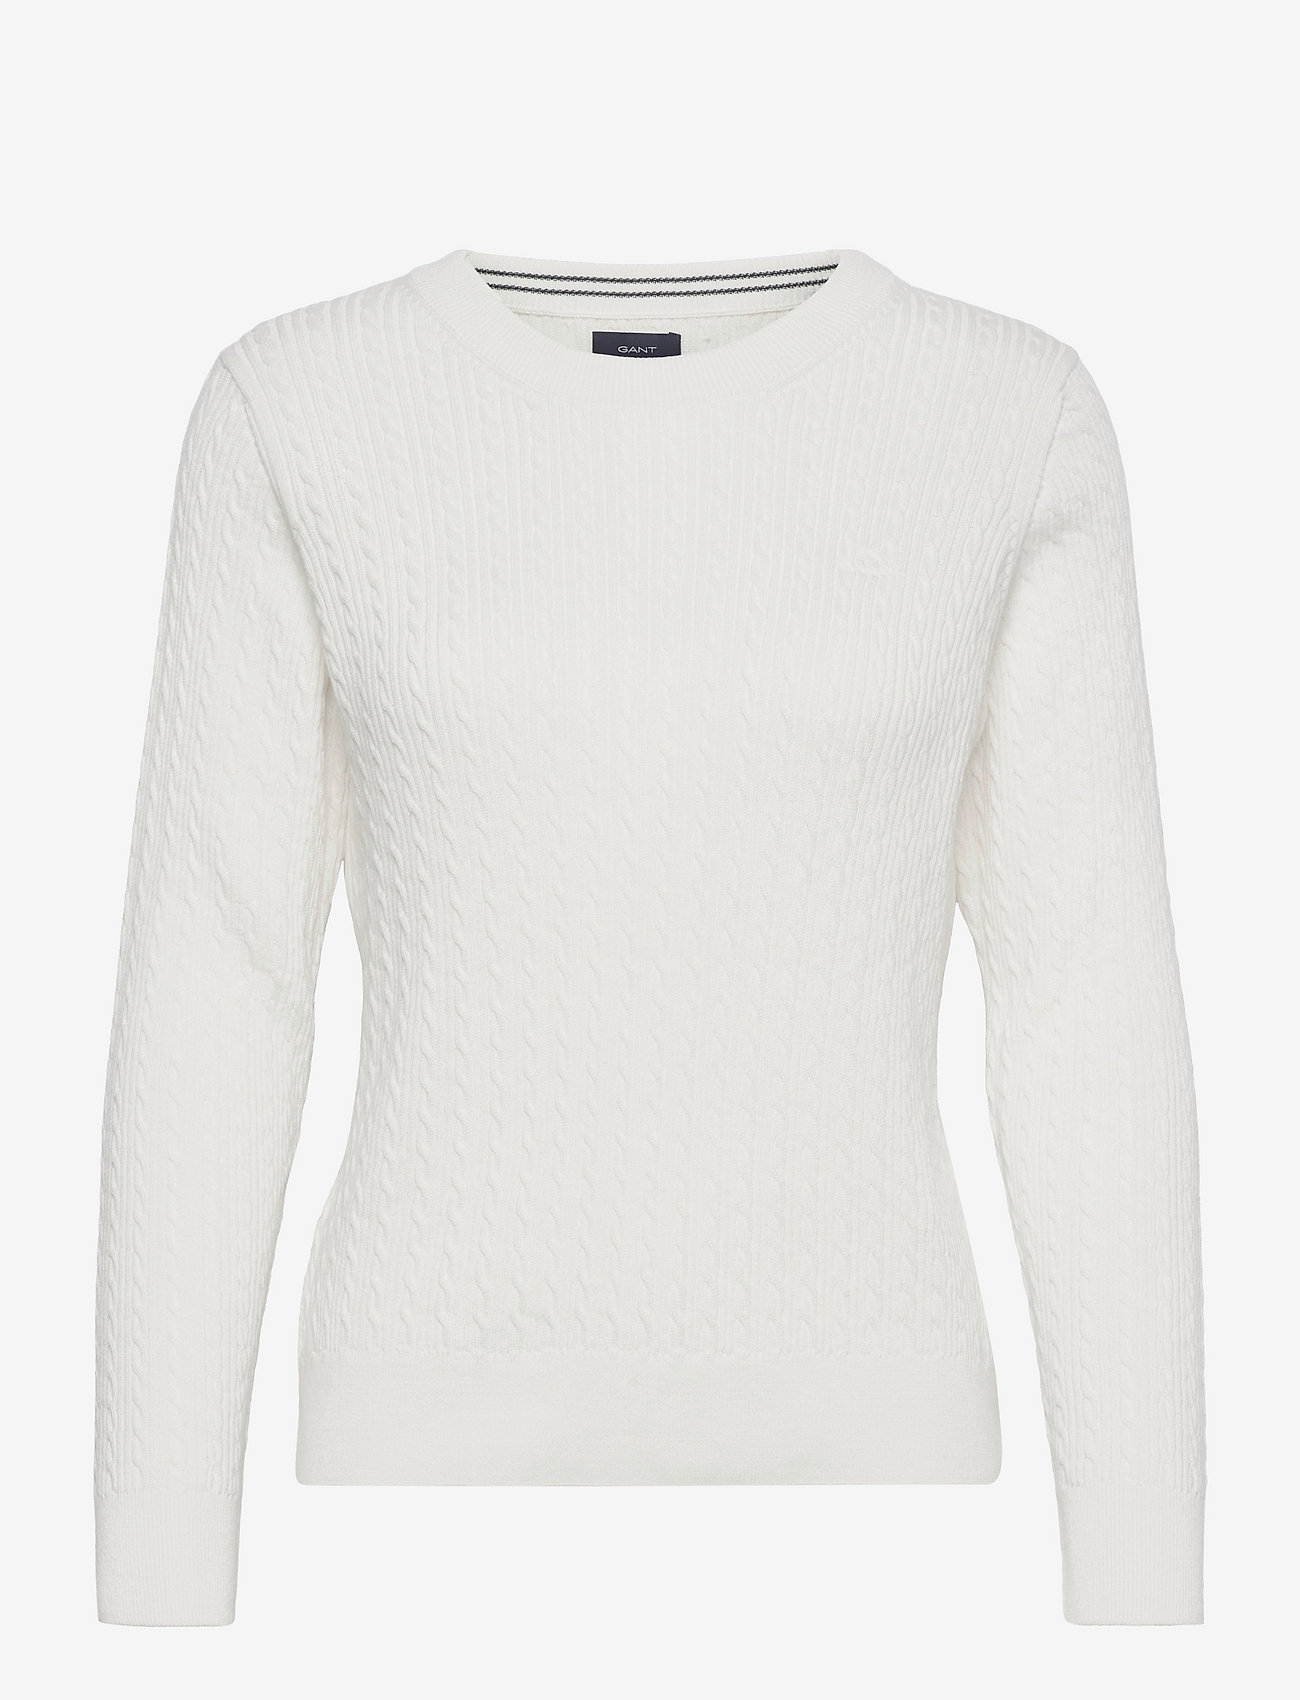 GANT - CABLE C NECK - sweaters - eggshell - 0